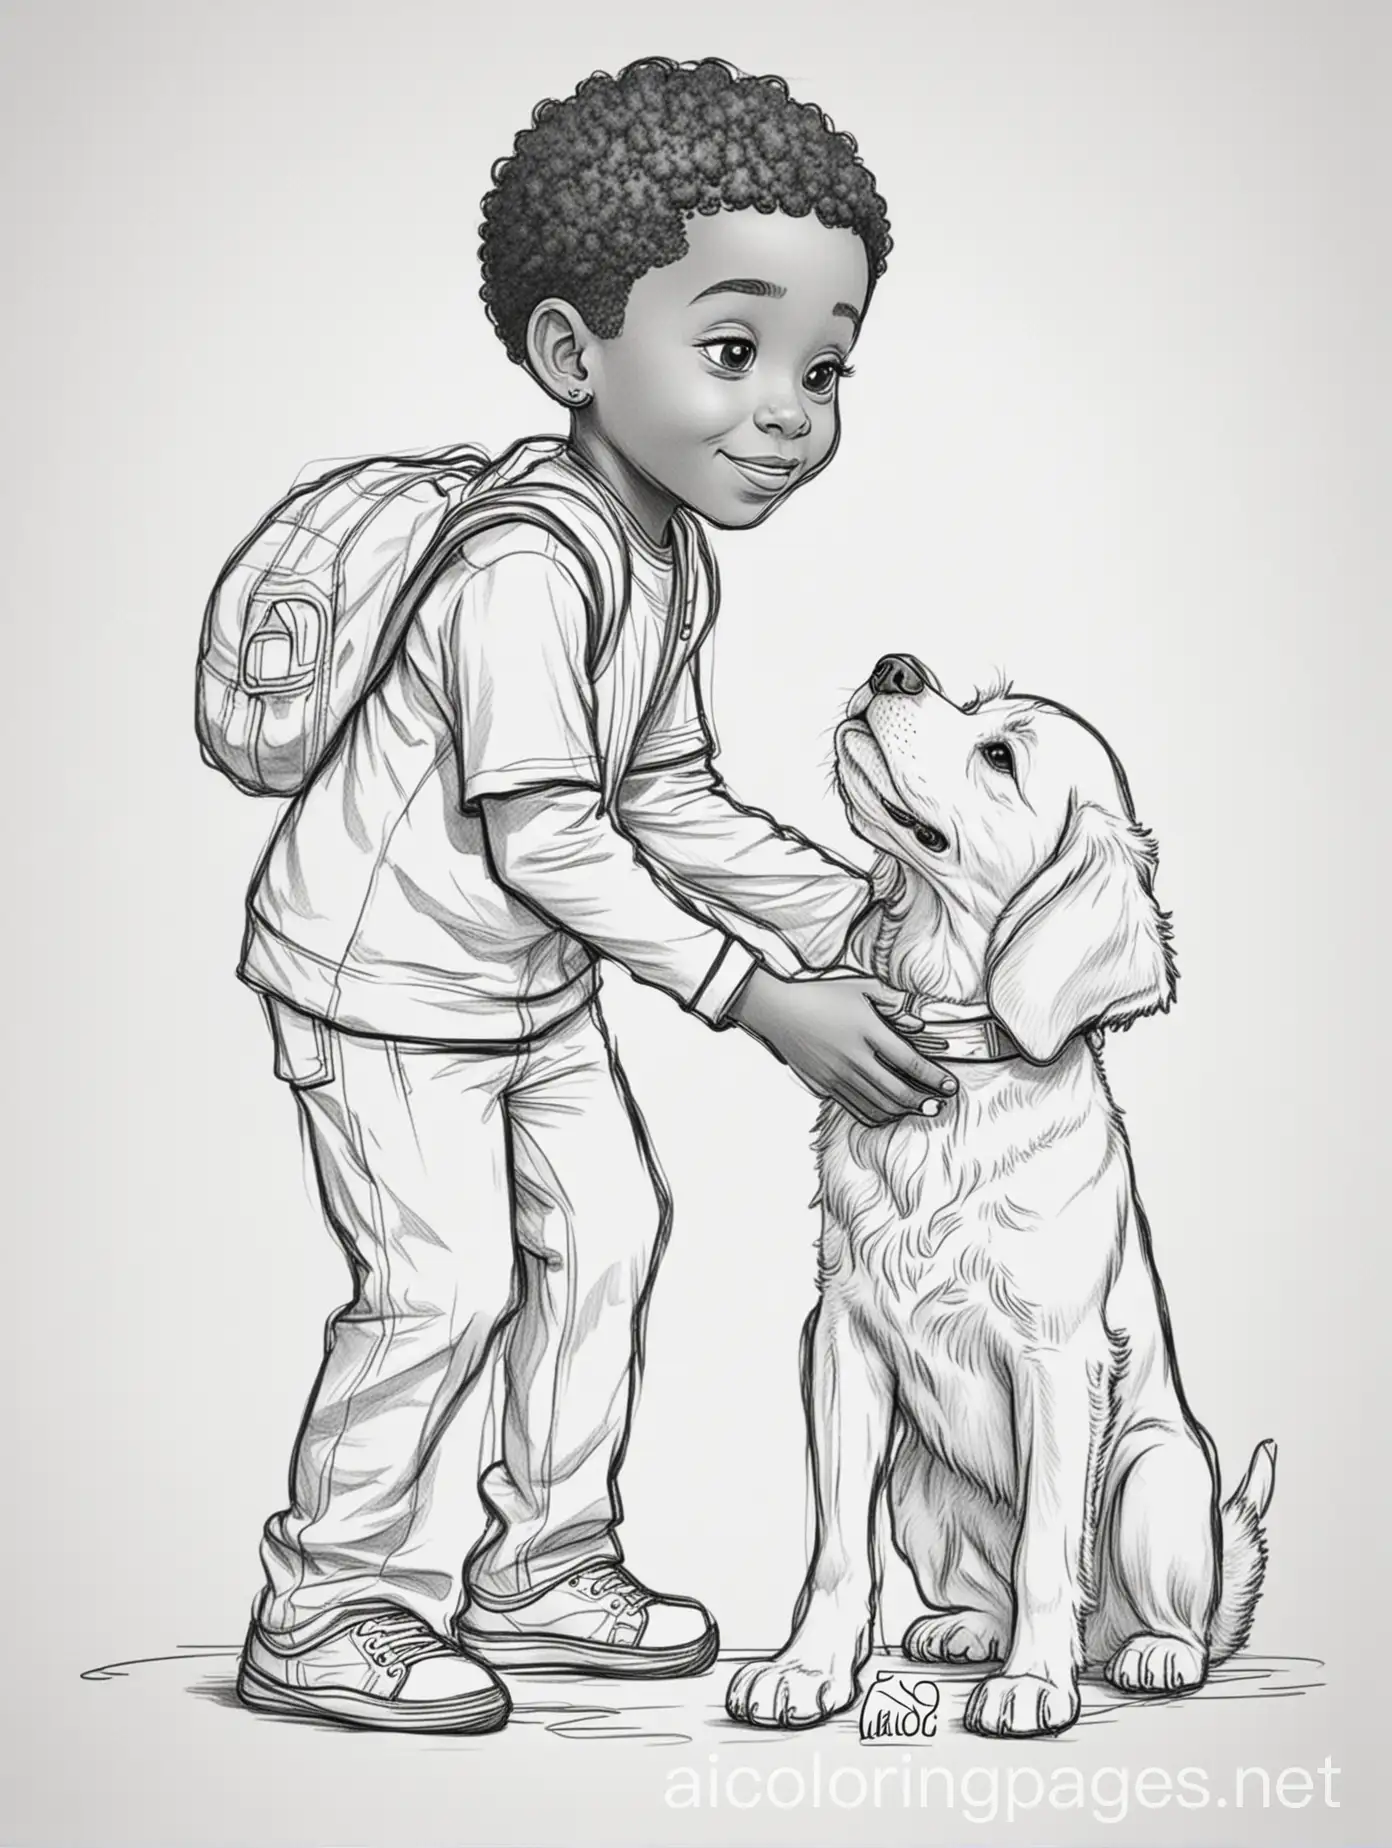 Black young Boy plays with dog coloring page, outlined with a white background, Coloring Page, black and white, line art, white background, Simplicity, Ample White Space. The background of the coloring page is plain white to make it easy for young children to color within the lines. The outlines of all the subjects are easy to distinguish, making it simple for kids to color without too much difficulty